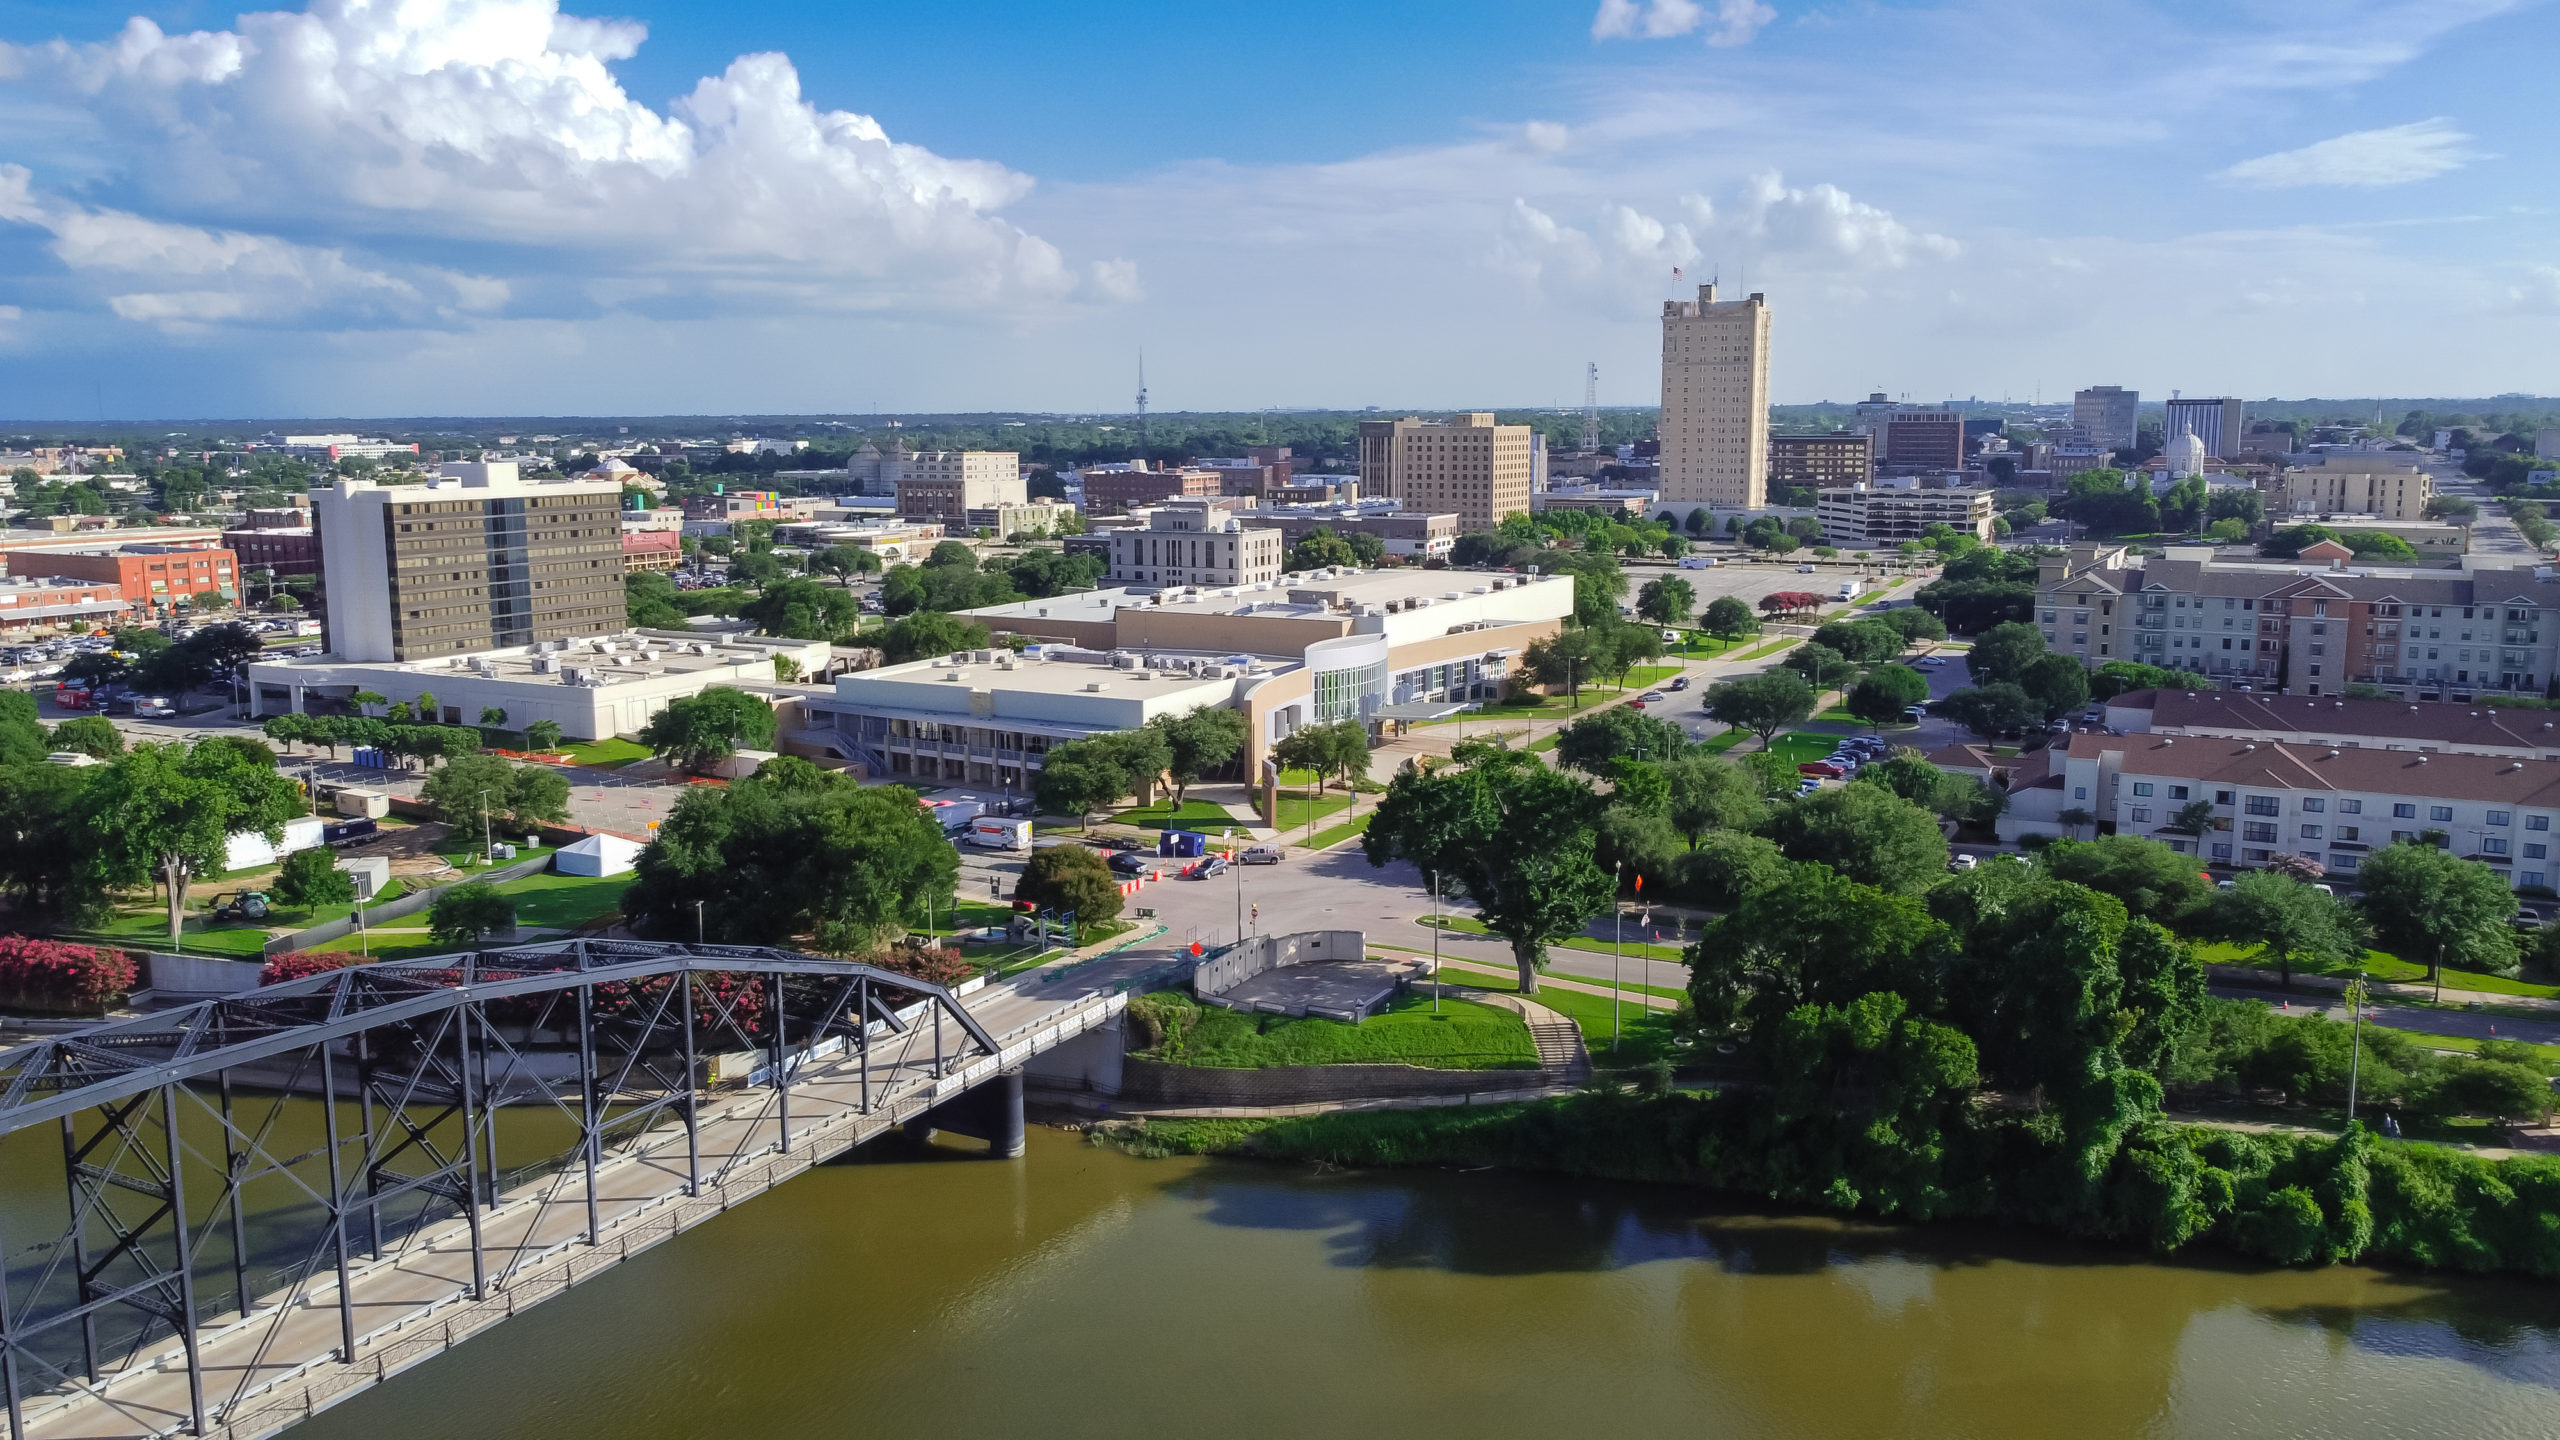 15 Best Things to Do in Waco, Texas